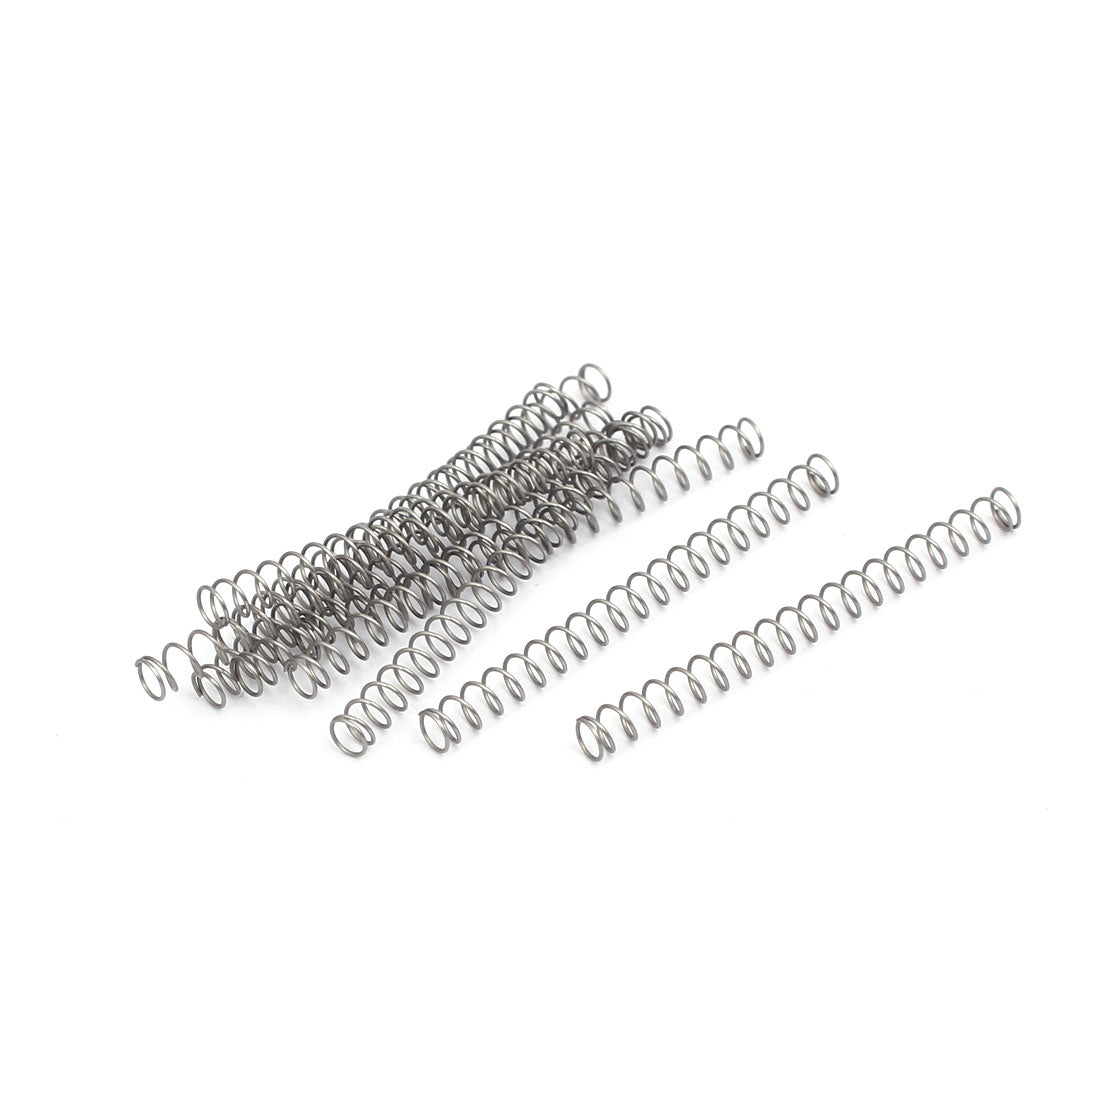 uxcell Uxcell 0.3mmx3mmx35mm 304 Stainless Steel Compression Springs Silver Tone 10pcs